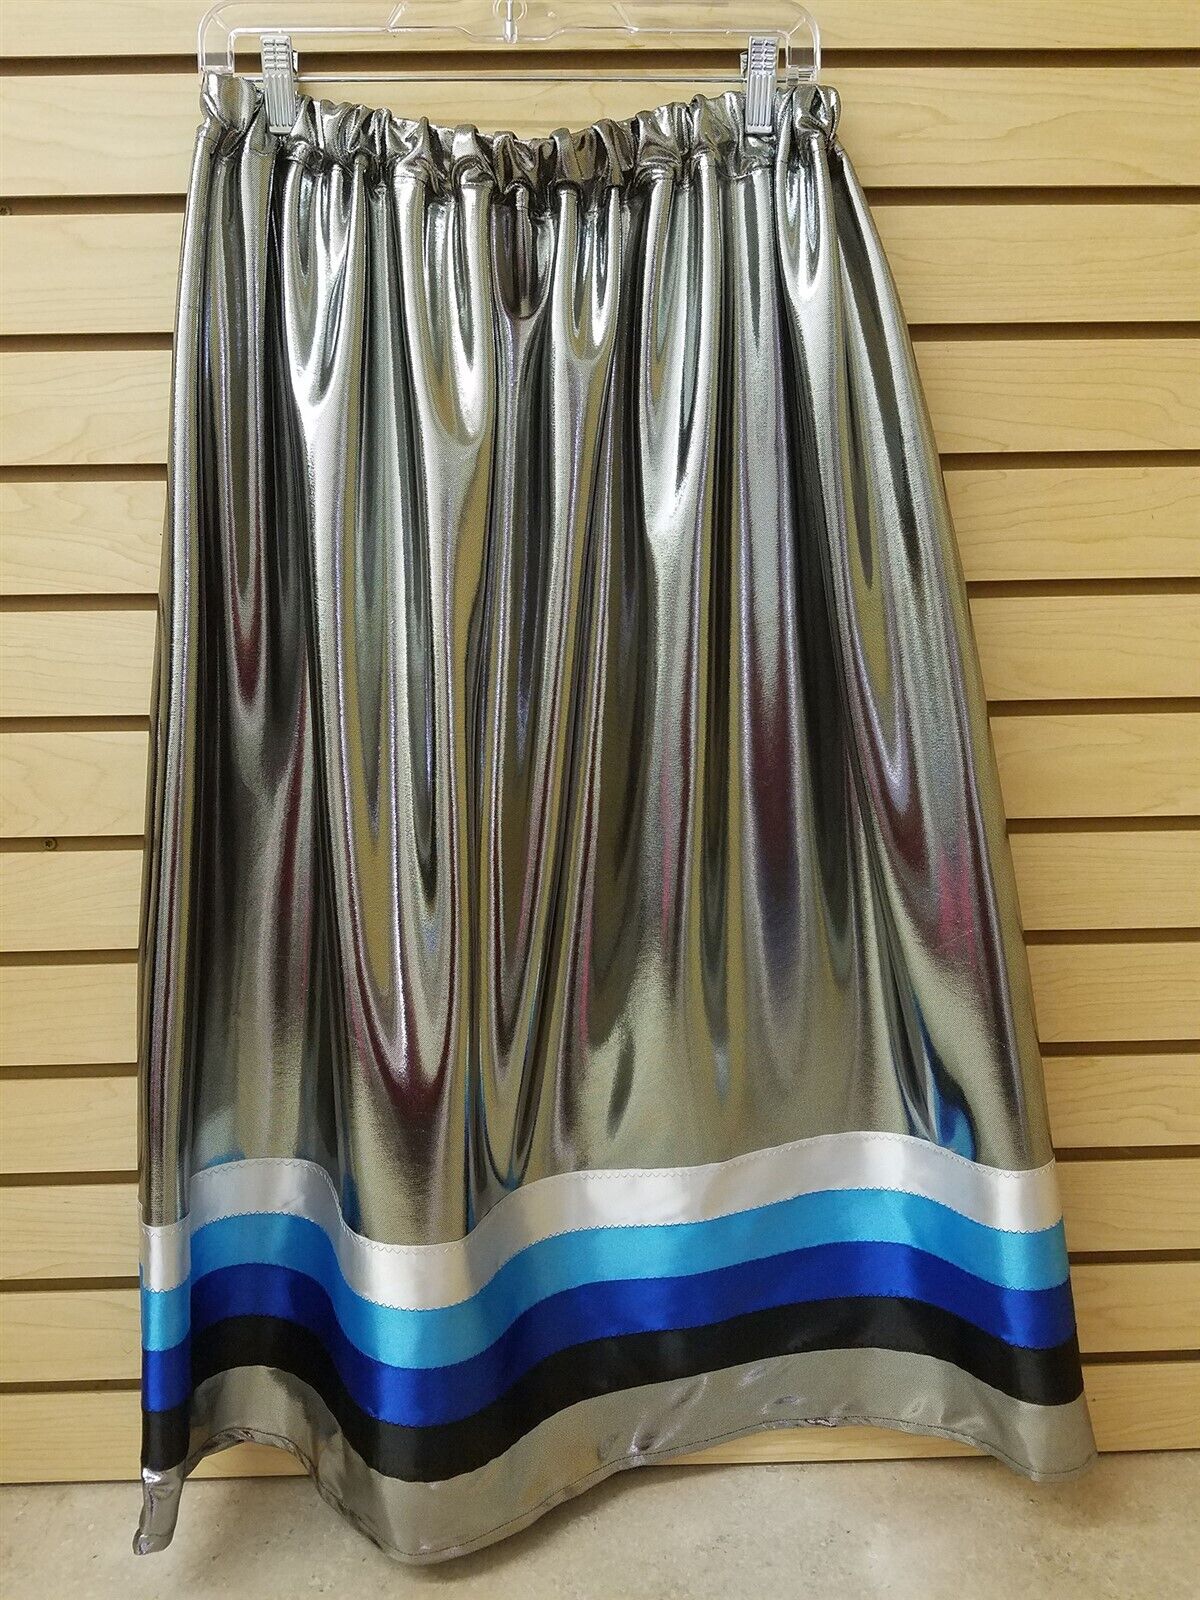 New 2xl Homemade Silver Satin Native American Indian Multicolored Ribbon Skirt